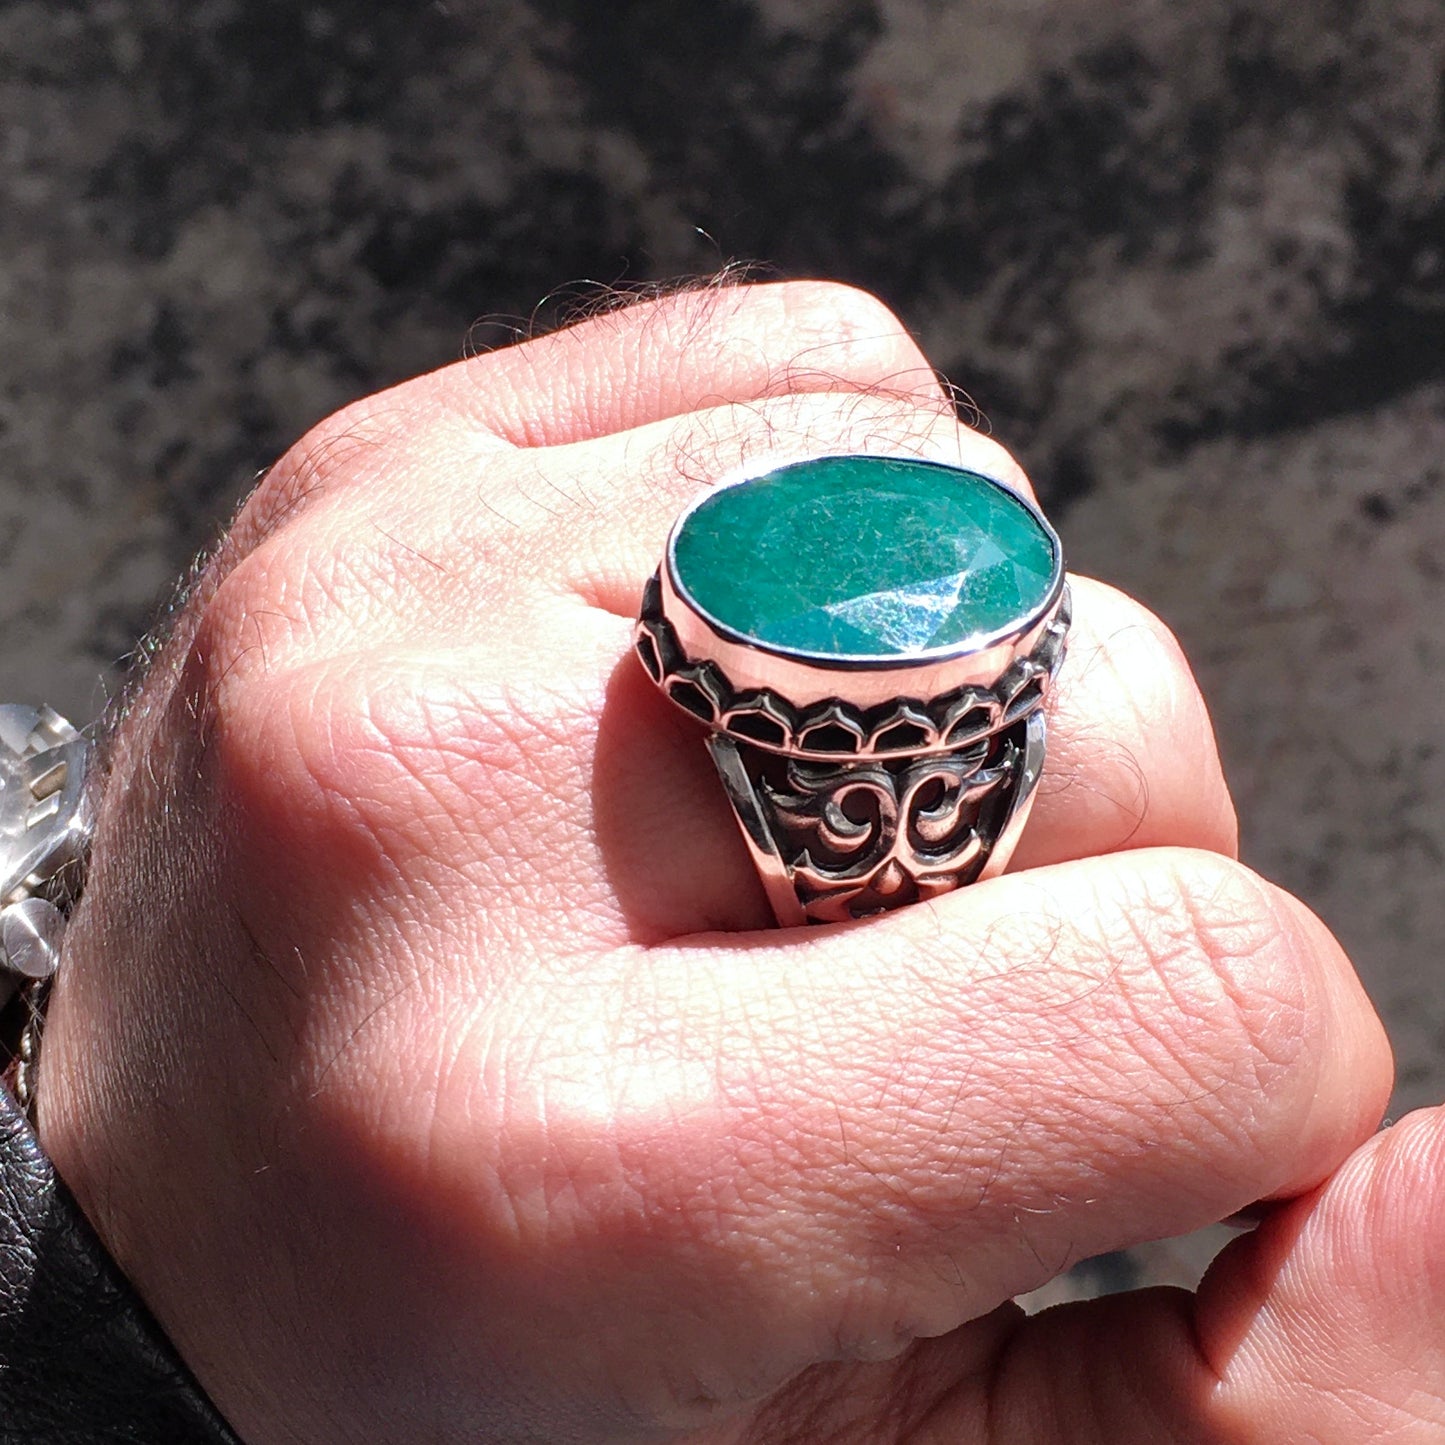 Handmade Ring Natural Big Emerald Unique Turkish Jewelry Sterling Silver 925